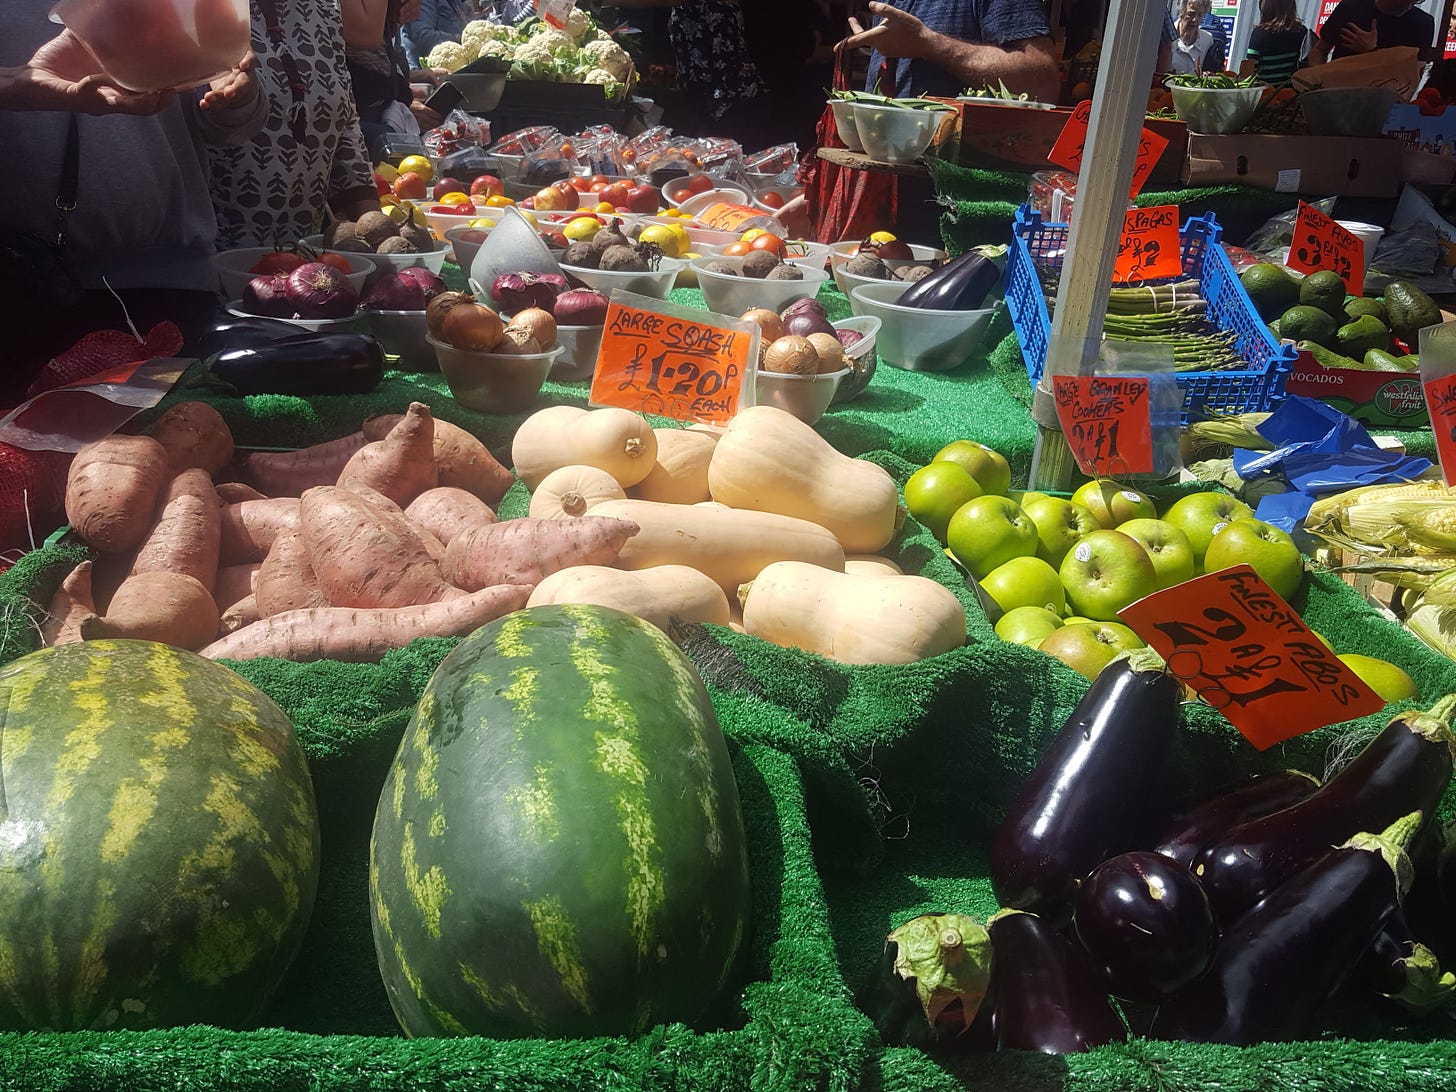 Food market stall. Lots of fresh fruit and veggies. Who grew them?